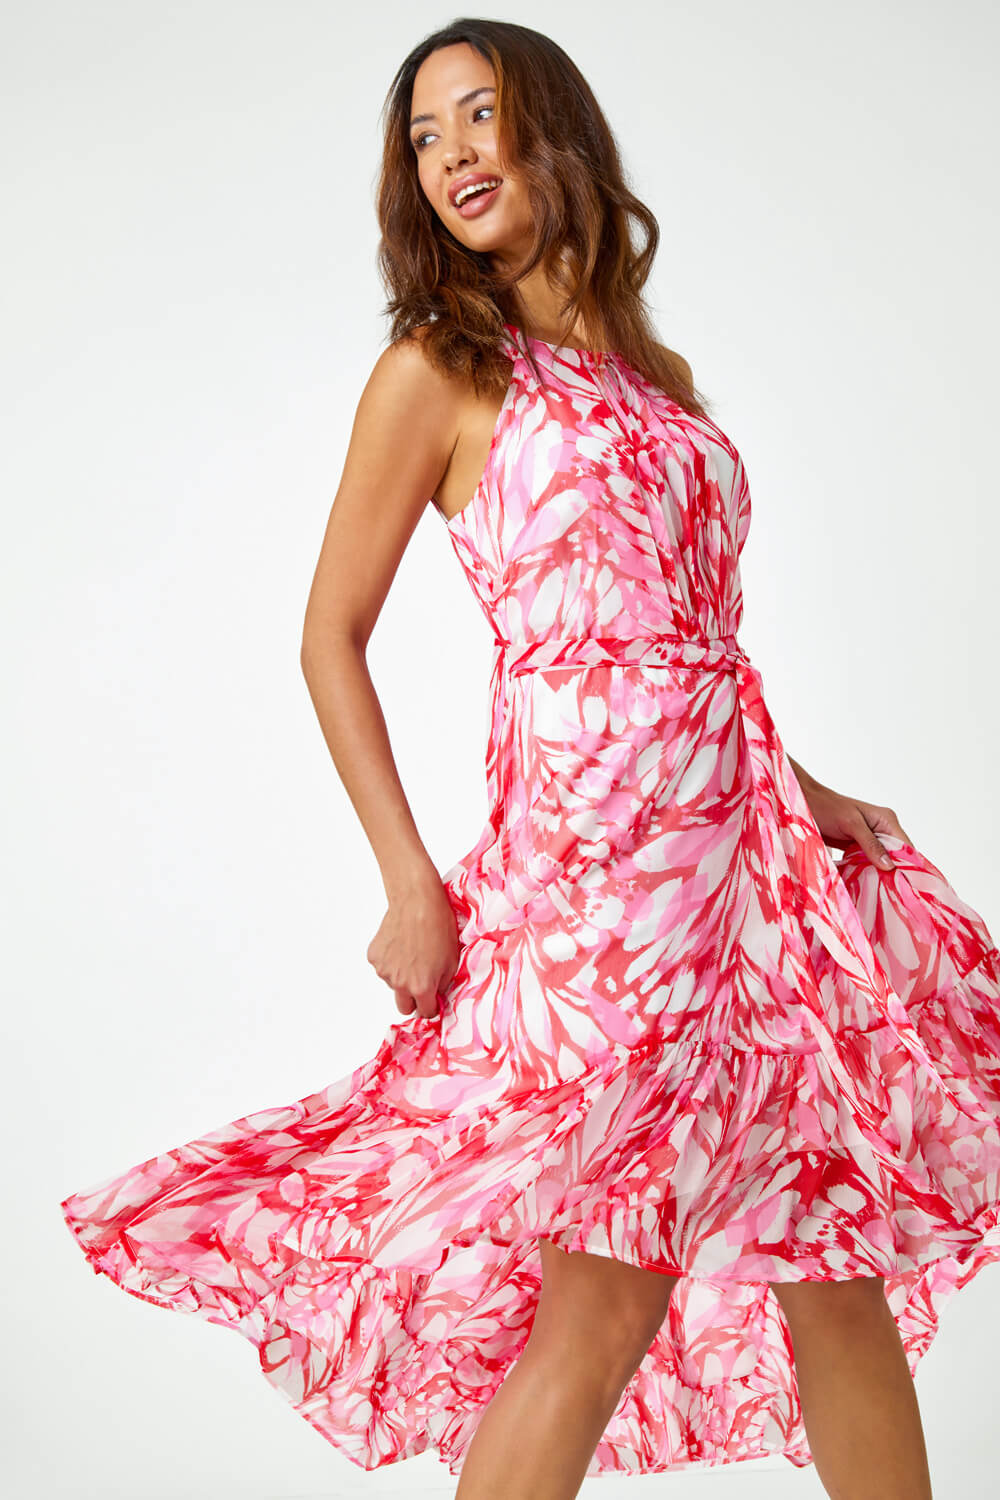 PINK Halter Neck Butterfly Print Dress, Image 2 of 5